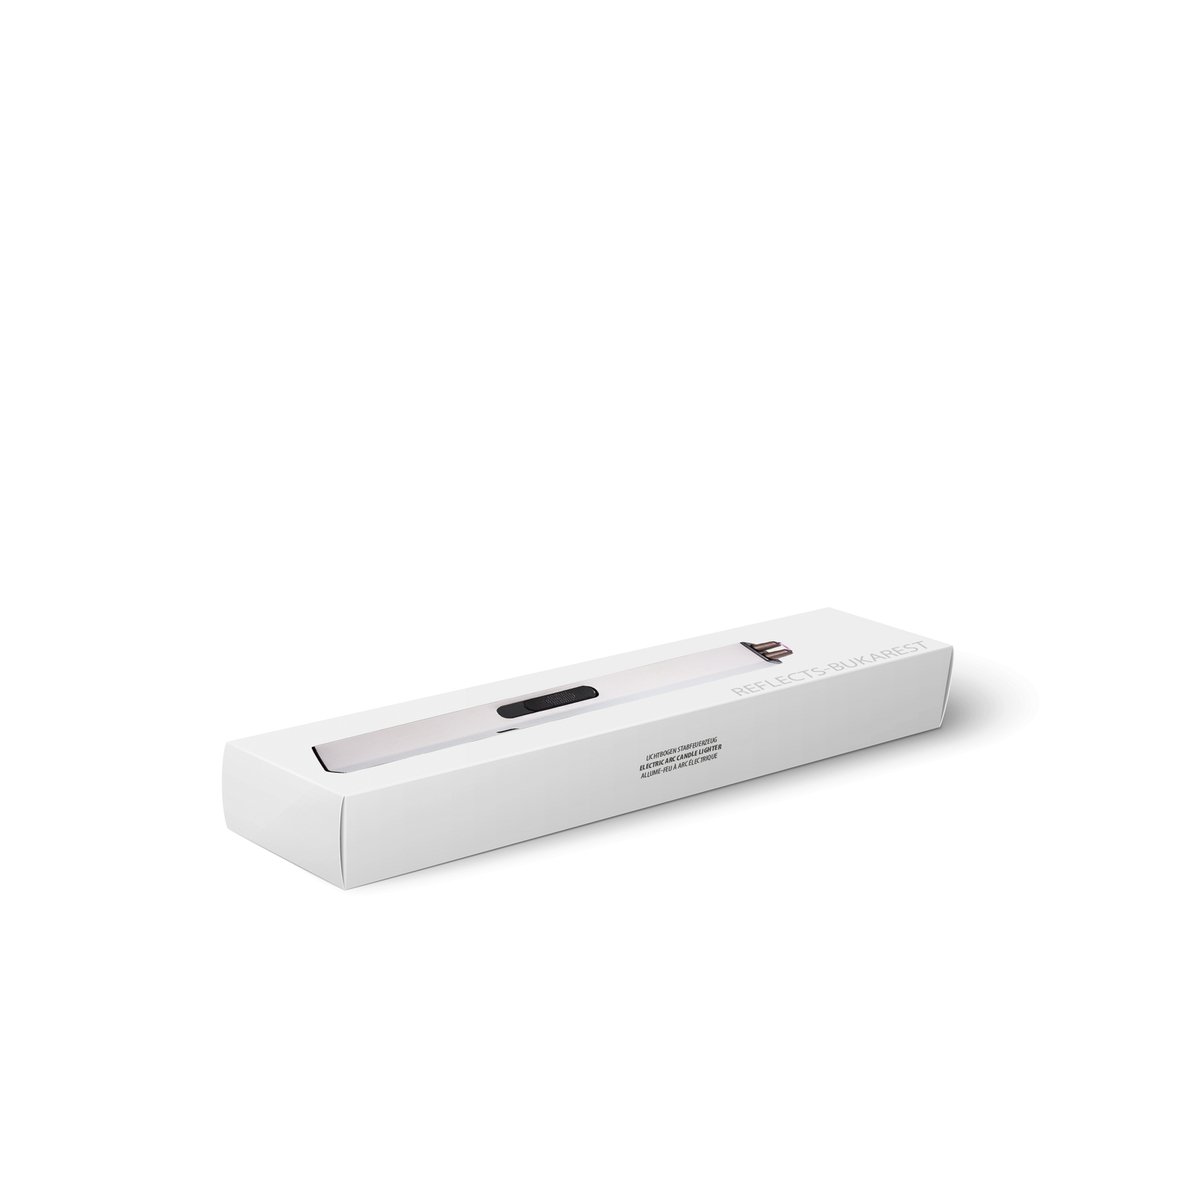 Electric arc candle lighter REEVES-BUKAREST white